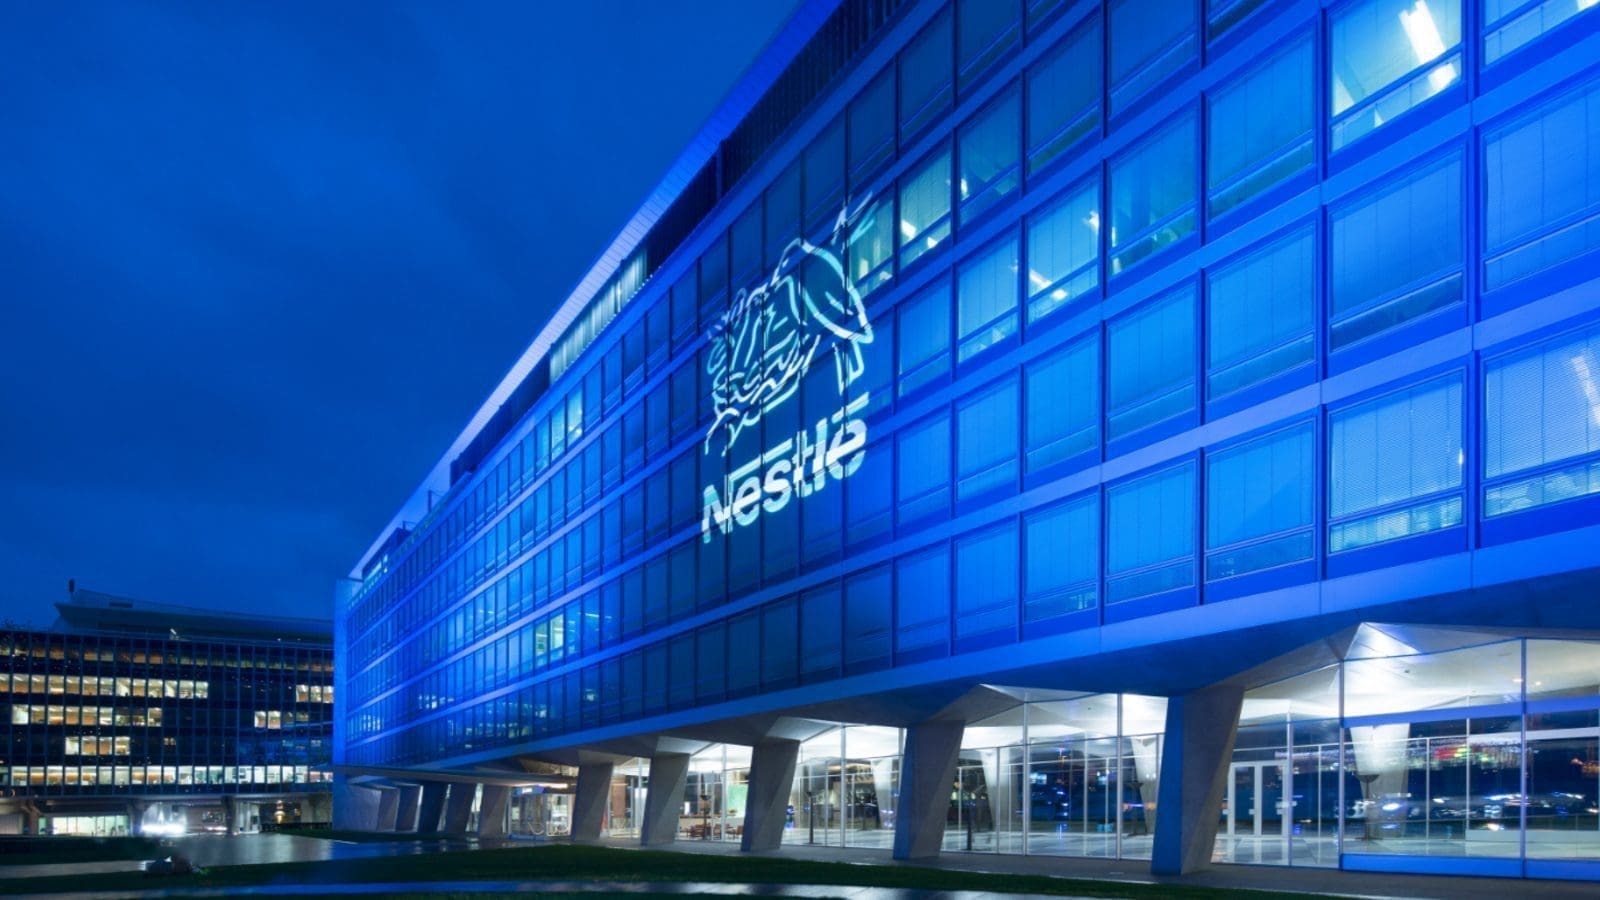 Nestlé outlines sales guidance as it pursues external growth opportunities in fast-growing segments and regions